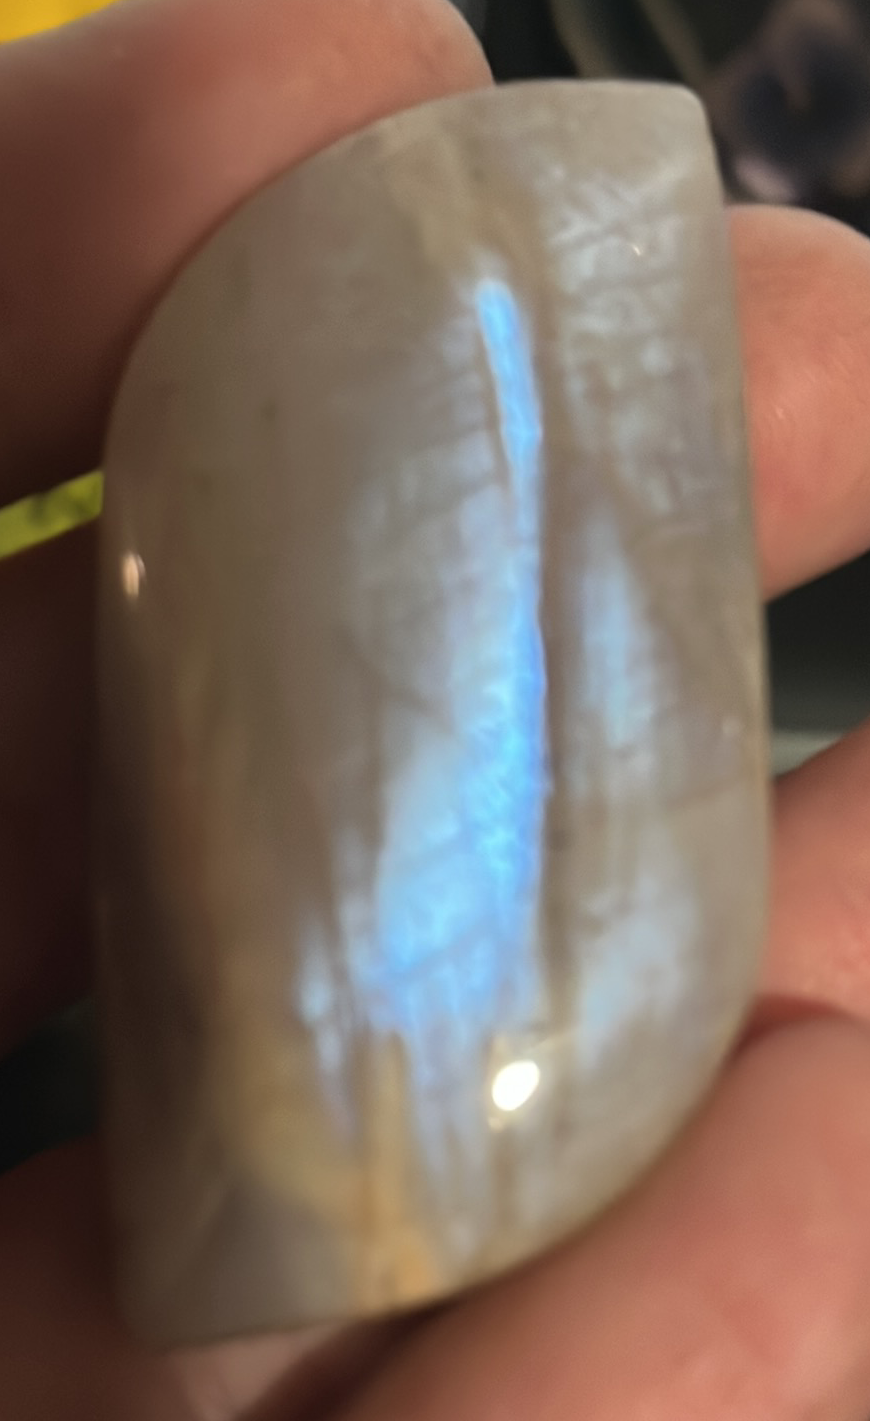 Peach Moonstone crystal palm stones with amazing flue flashing colors. Emotional balance and enhanced intuition and peace